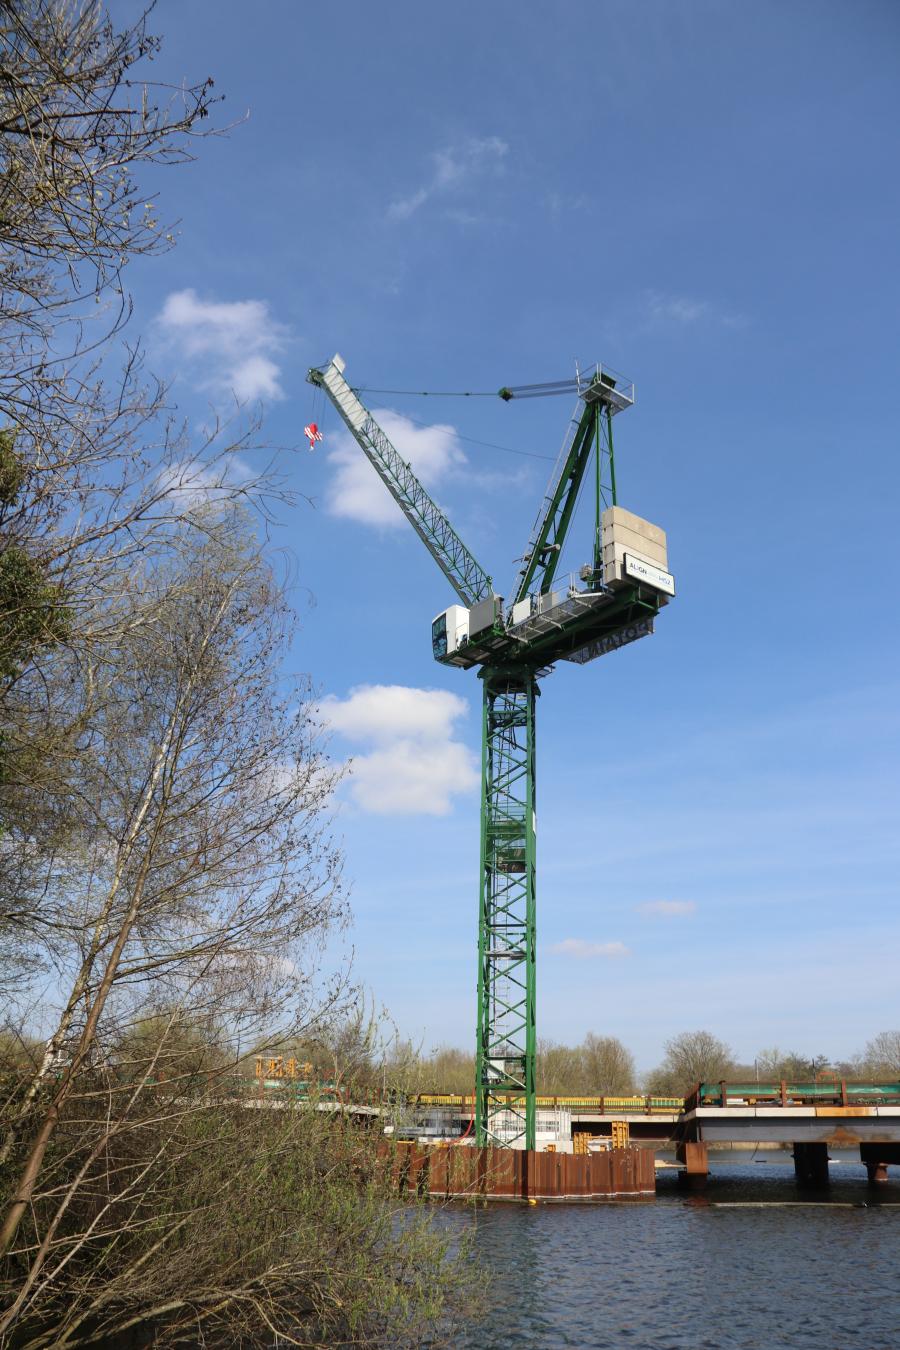 The first four Potain MR 225 A luffing jib cranes are already working on construction of the Colne Valley Viaduct, which will form part of the rail line assigned to the Align JV.